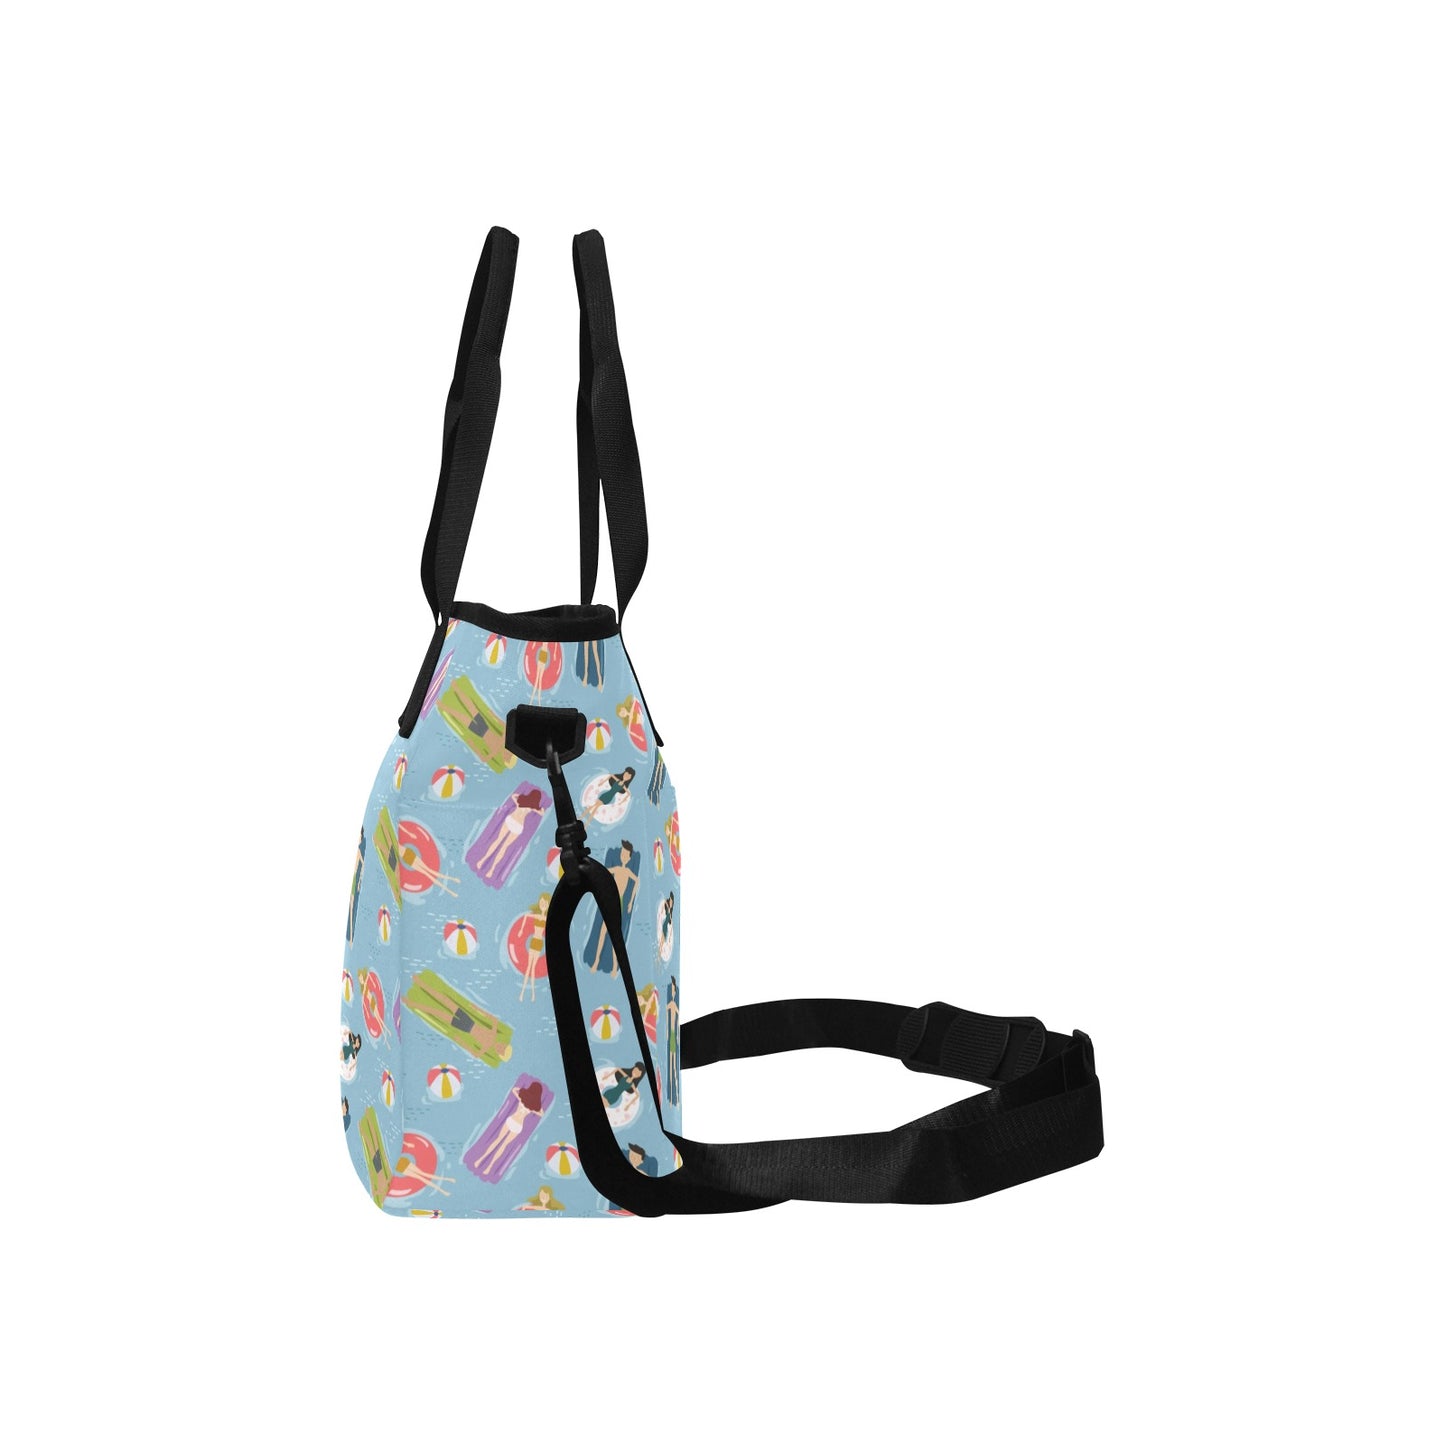 Beach Float - Tote Bag with Shoulder Strap Nylon Tote Bag